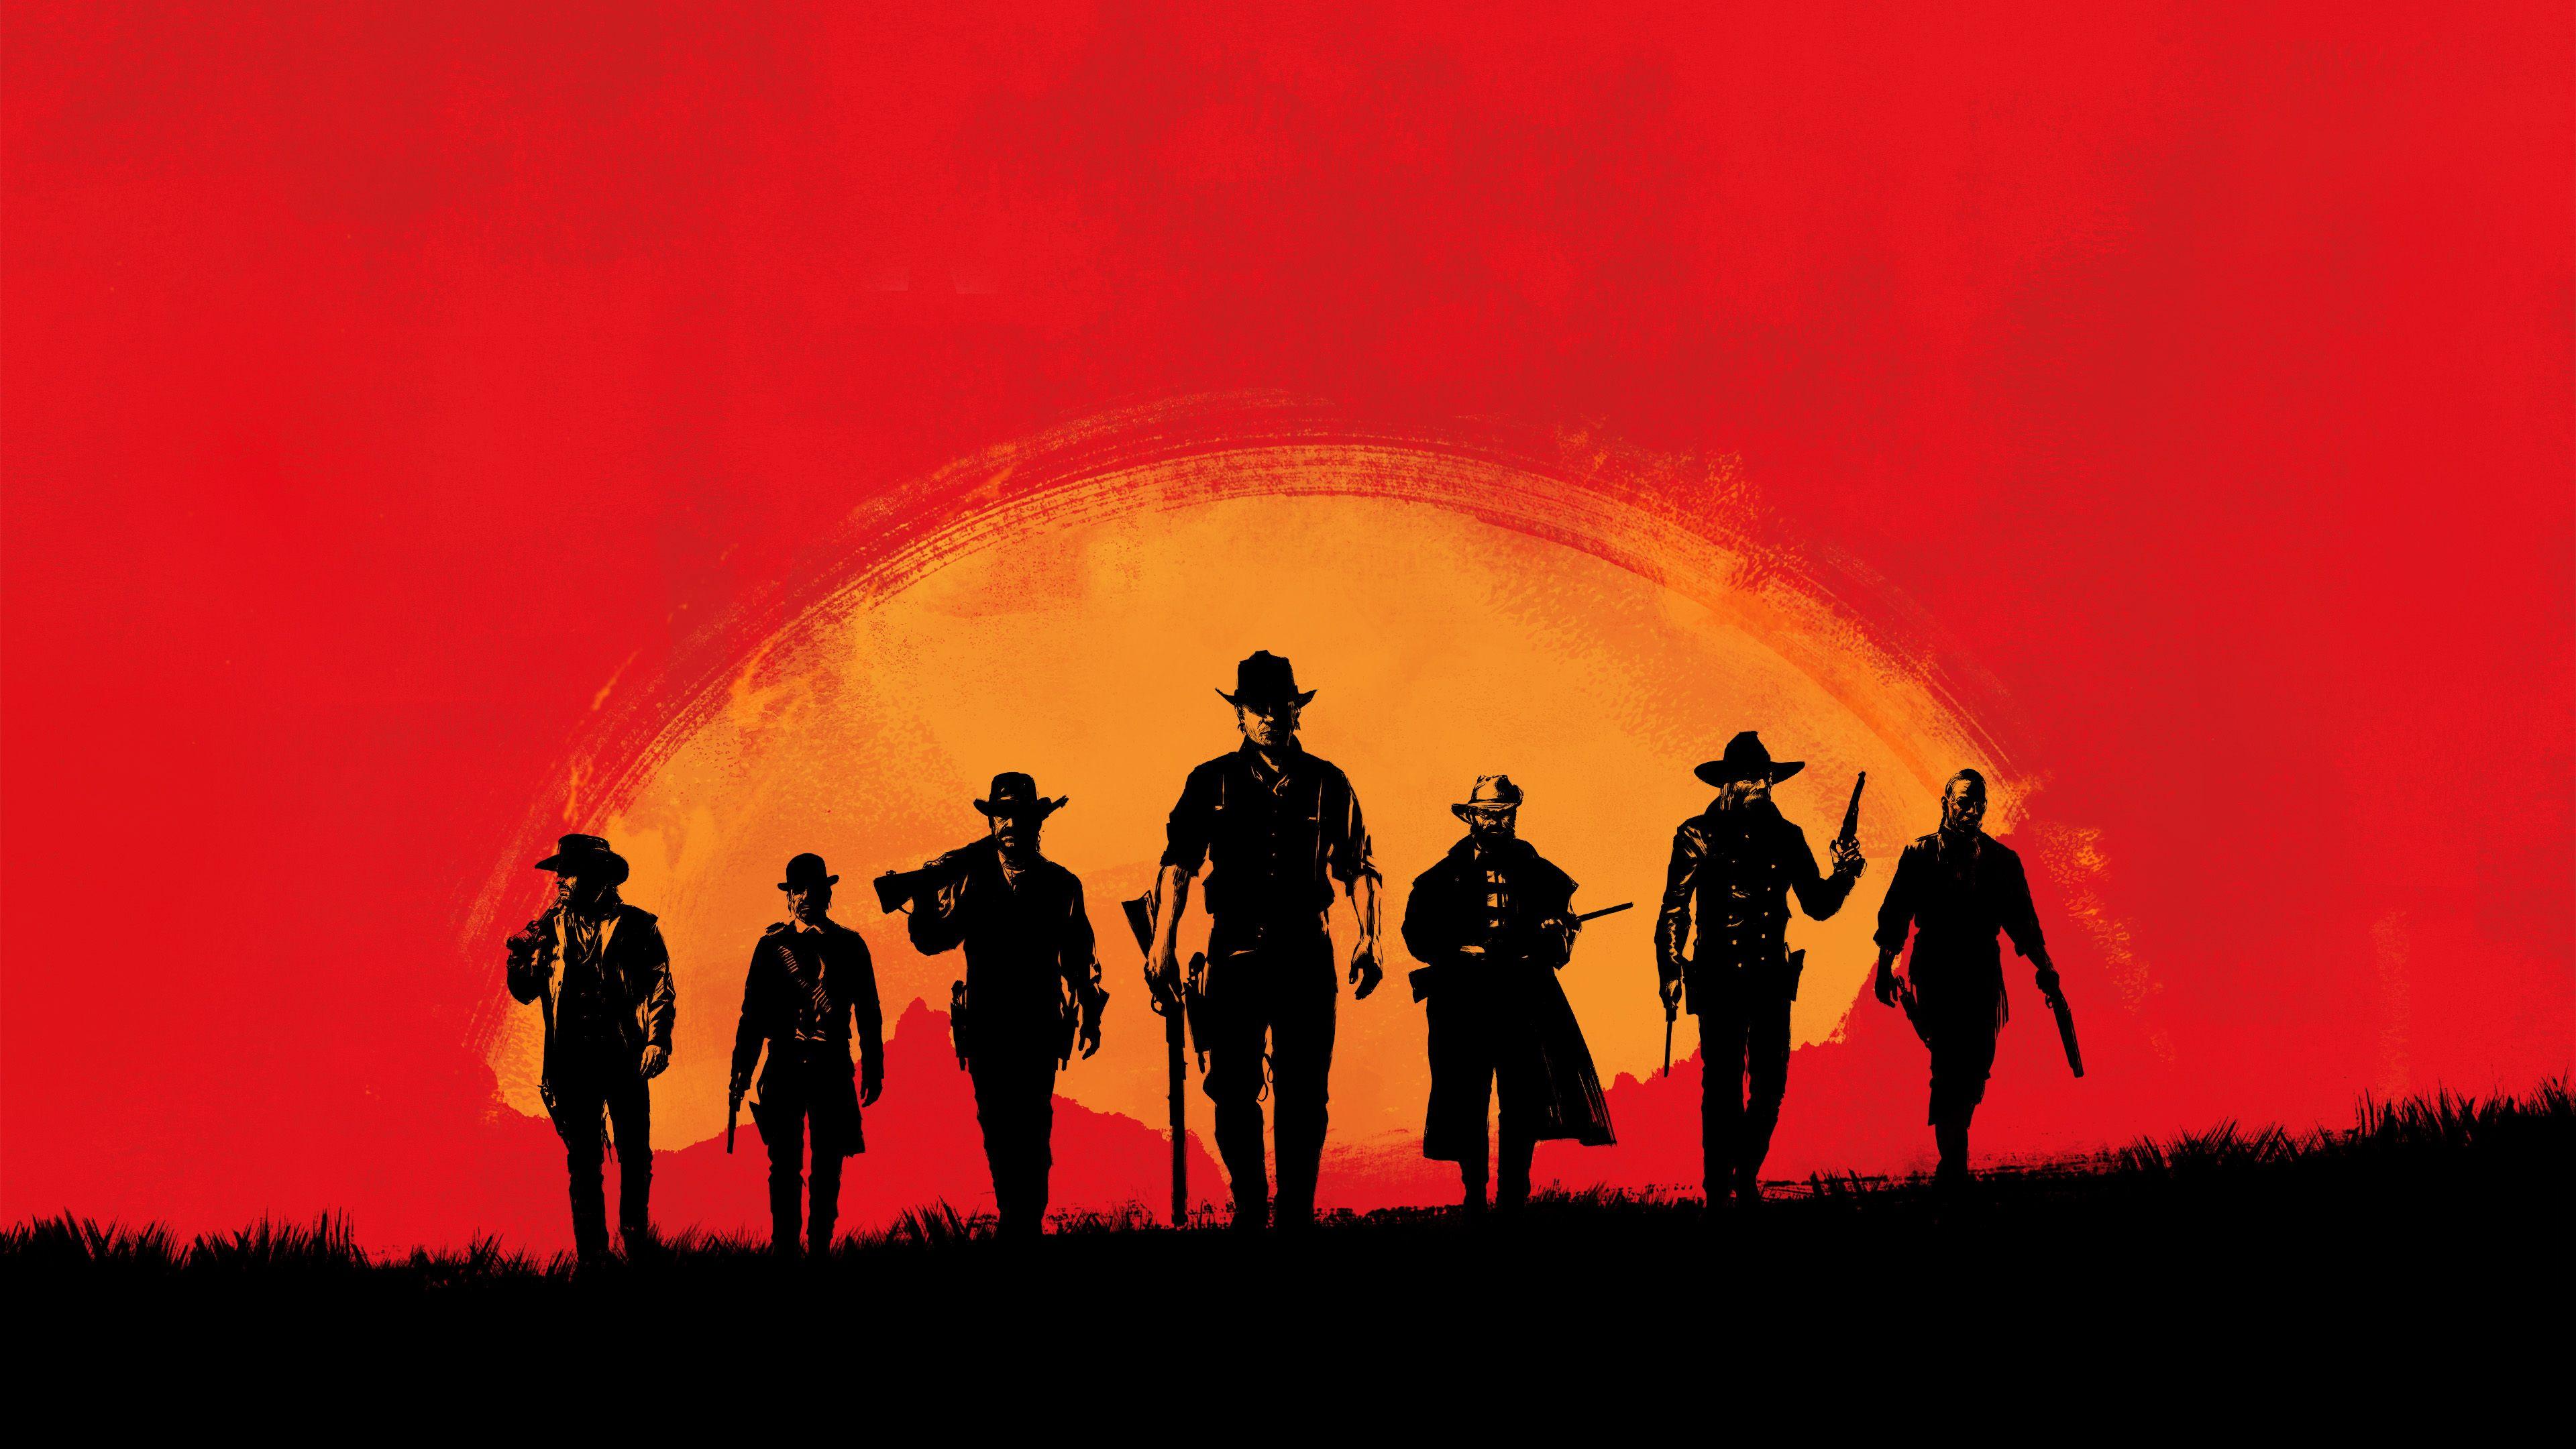 Red Dead Redemption 2 Wallpapers Top Free Red Dead